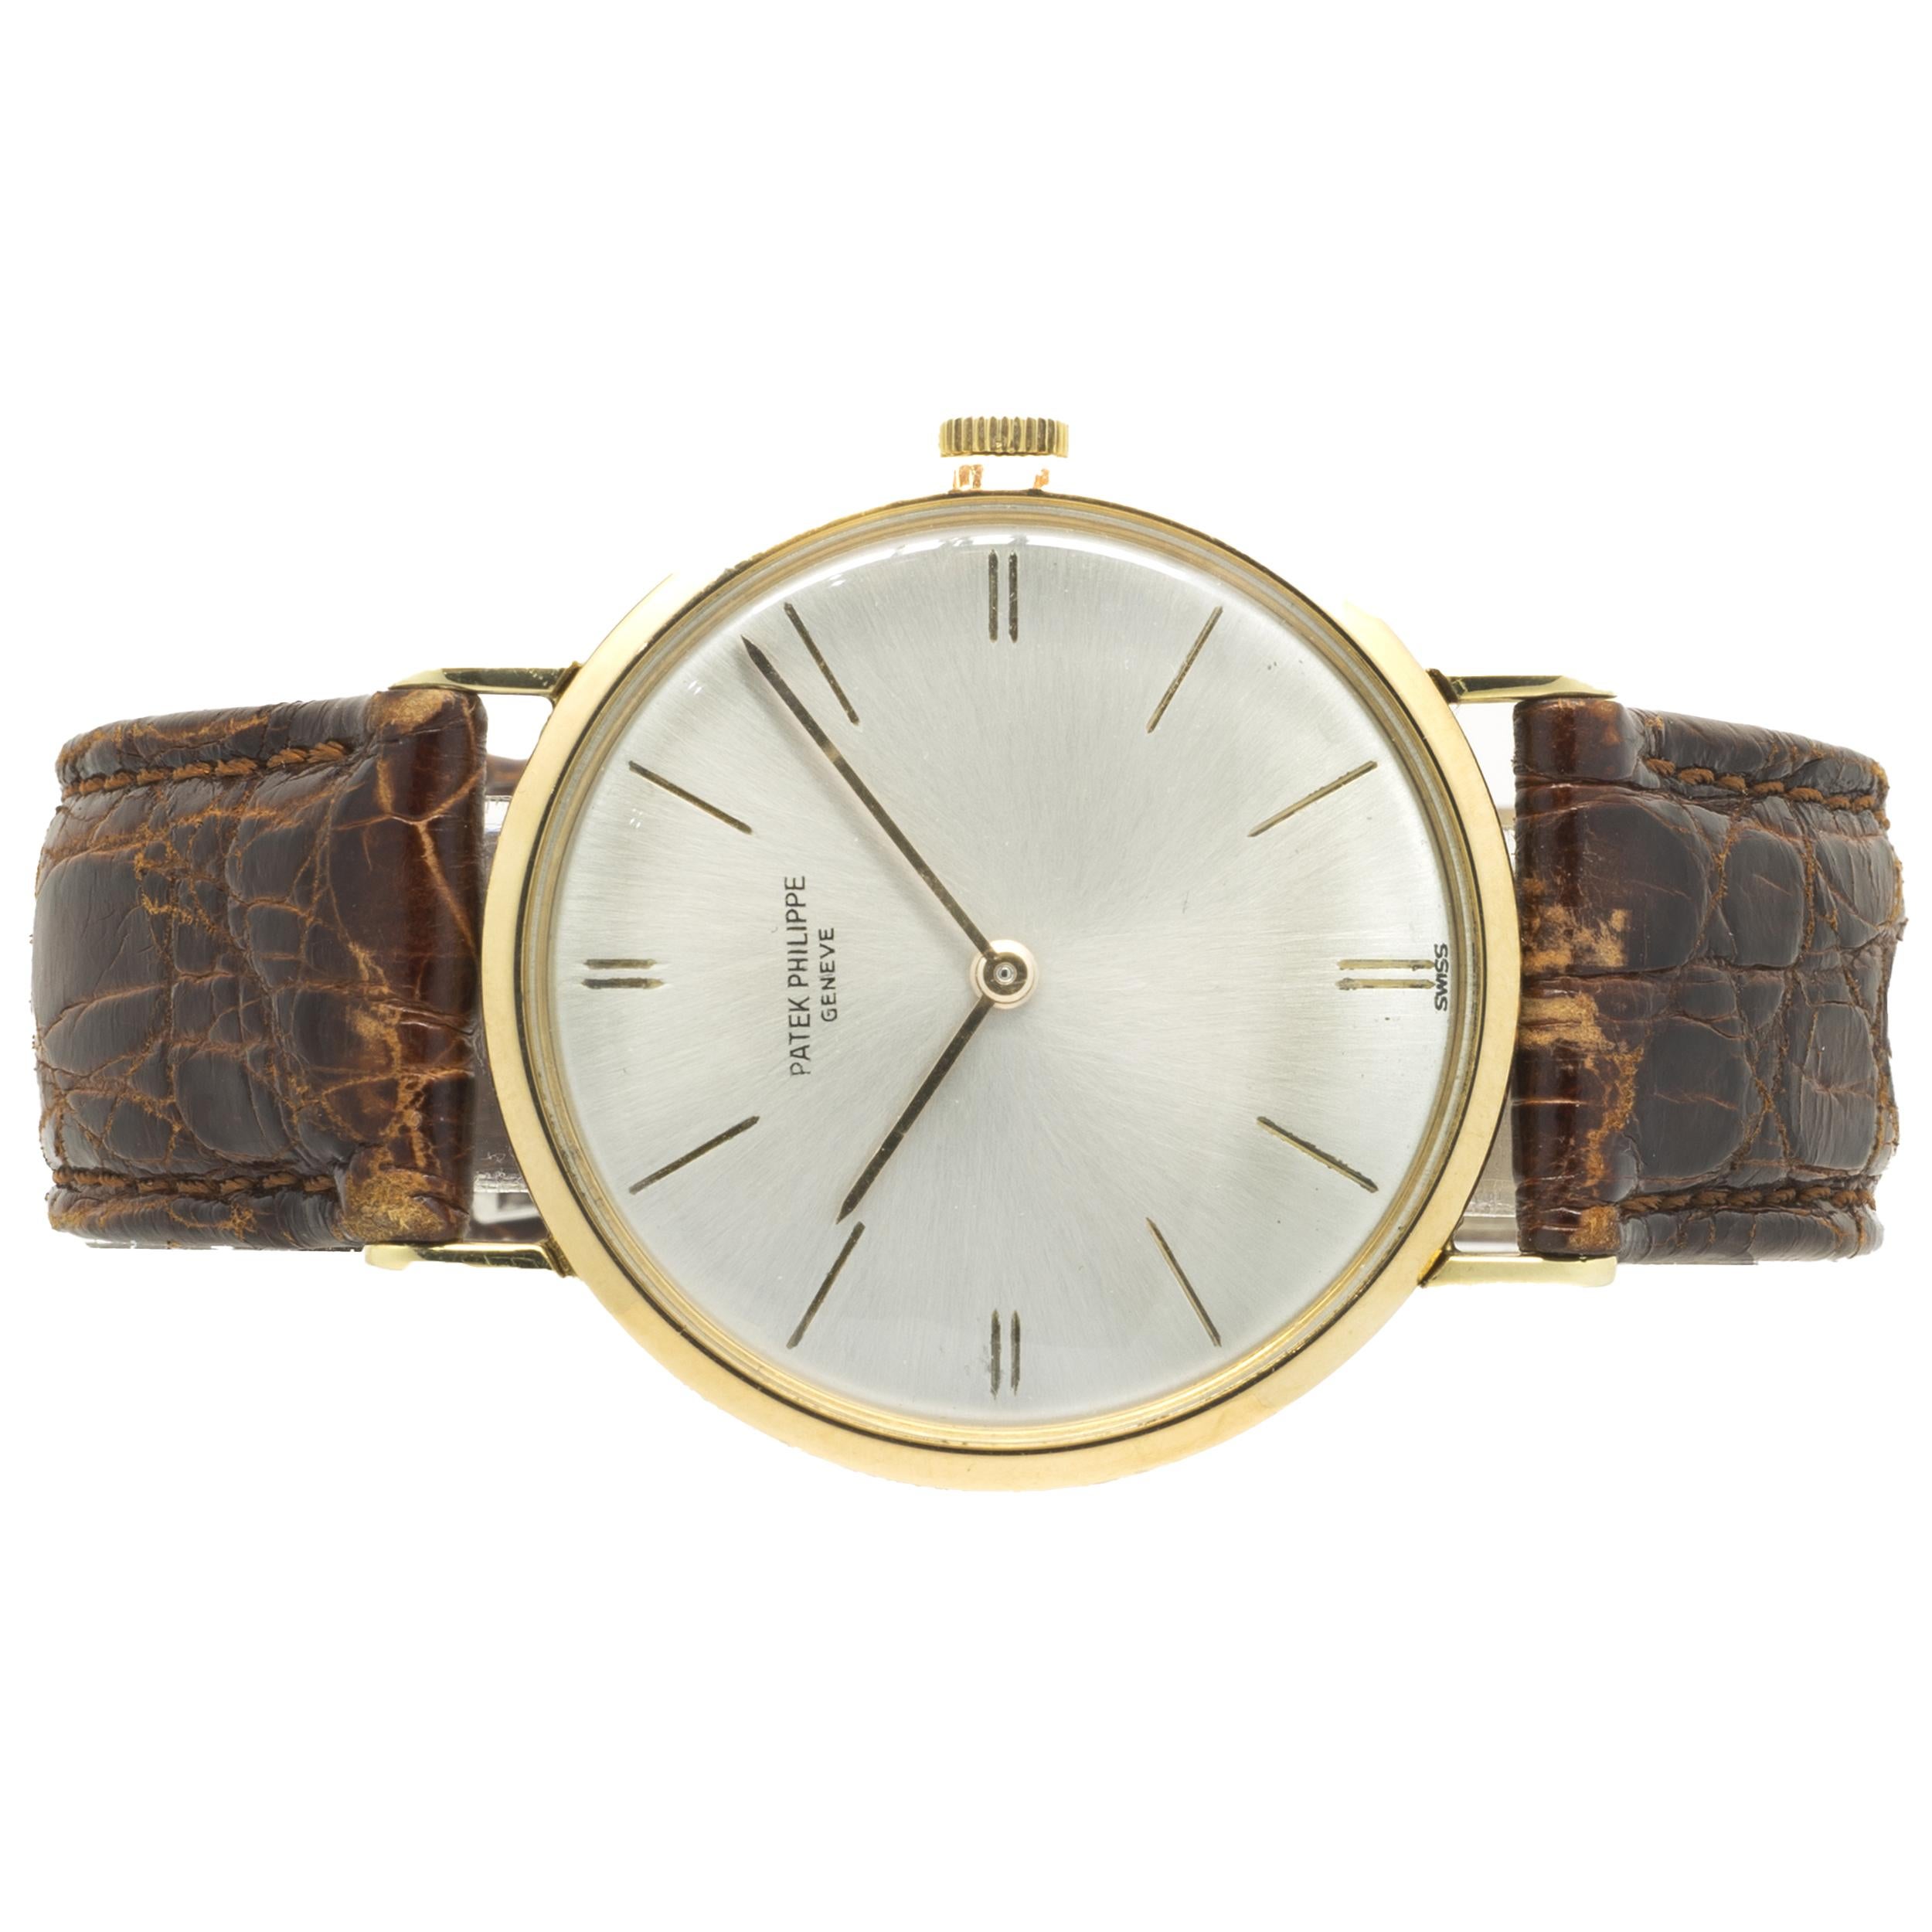 Movement: automatic
Function: hours, minutes
Case: 34mm 18K yellow gold round case, acrylic crystal
Dial: silver etched stick dial
Band: brown crocodile strap with buckle 
Reference #: 3468 
Serial #: 2656XXX




No box or papers included
Guaranteed